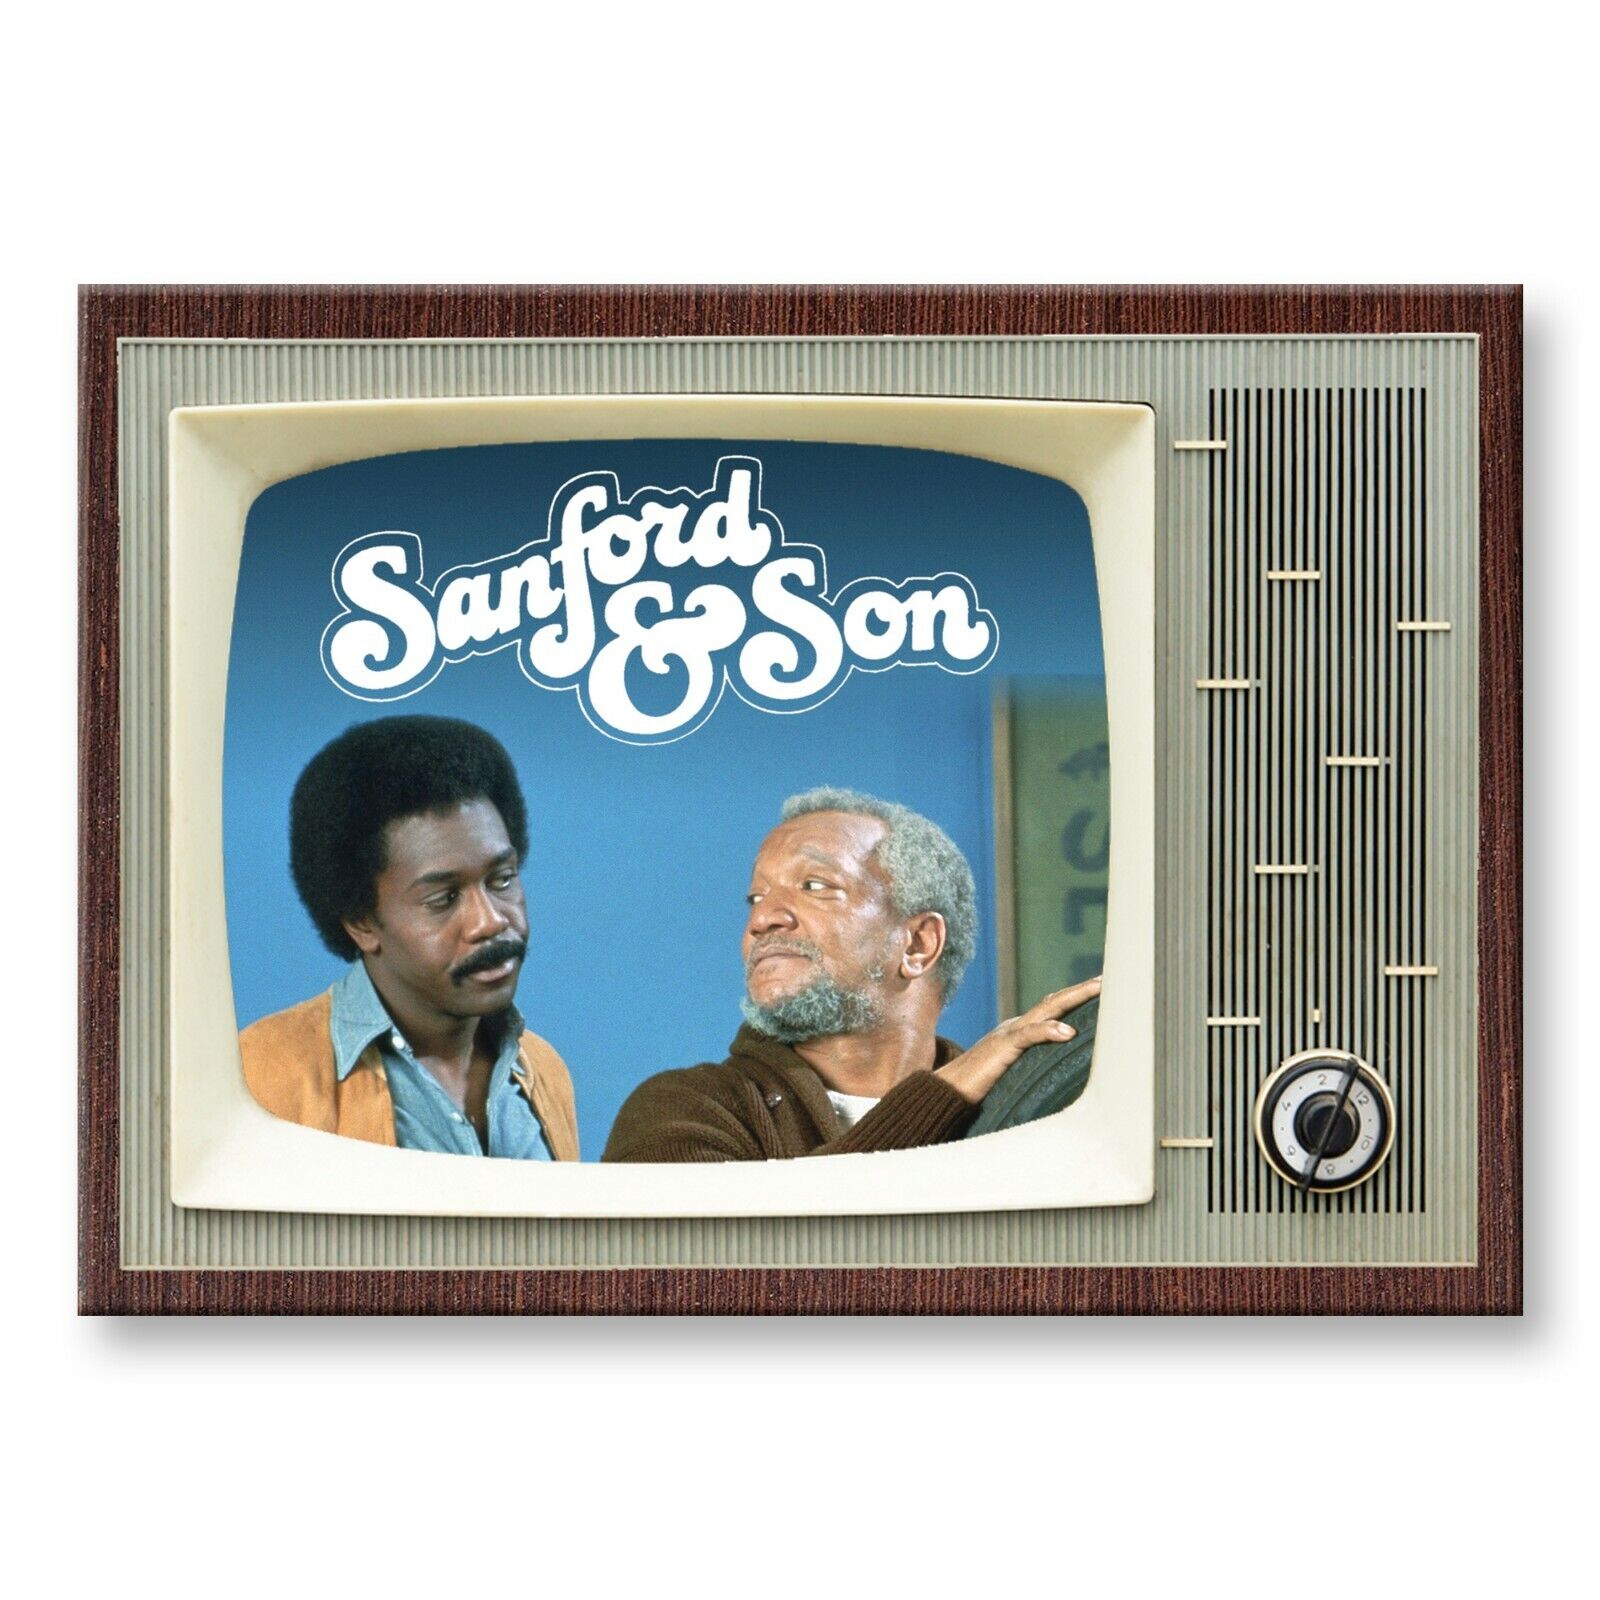 SANFORD AND SON TV Show TV 3.5 inches x 2.5 inches Steel FRIDGE MAGNET